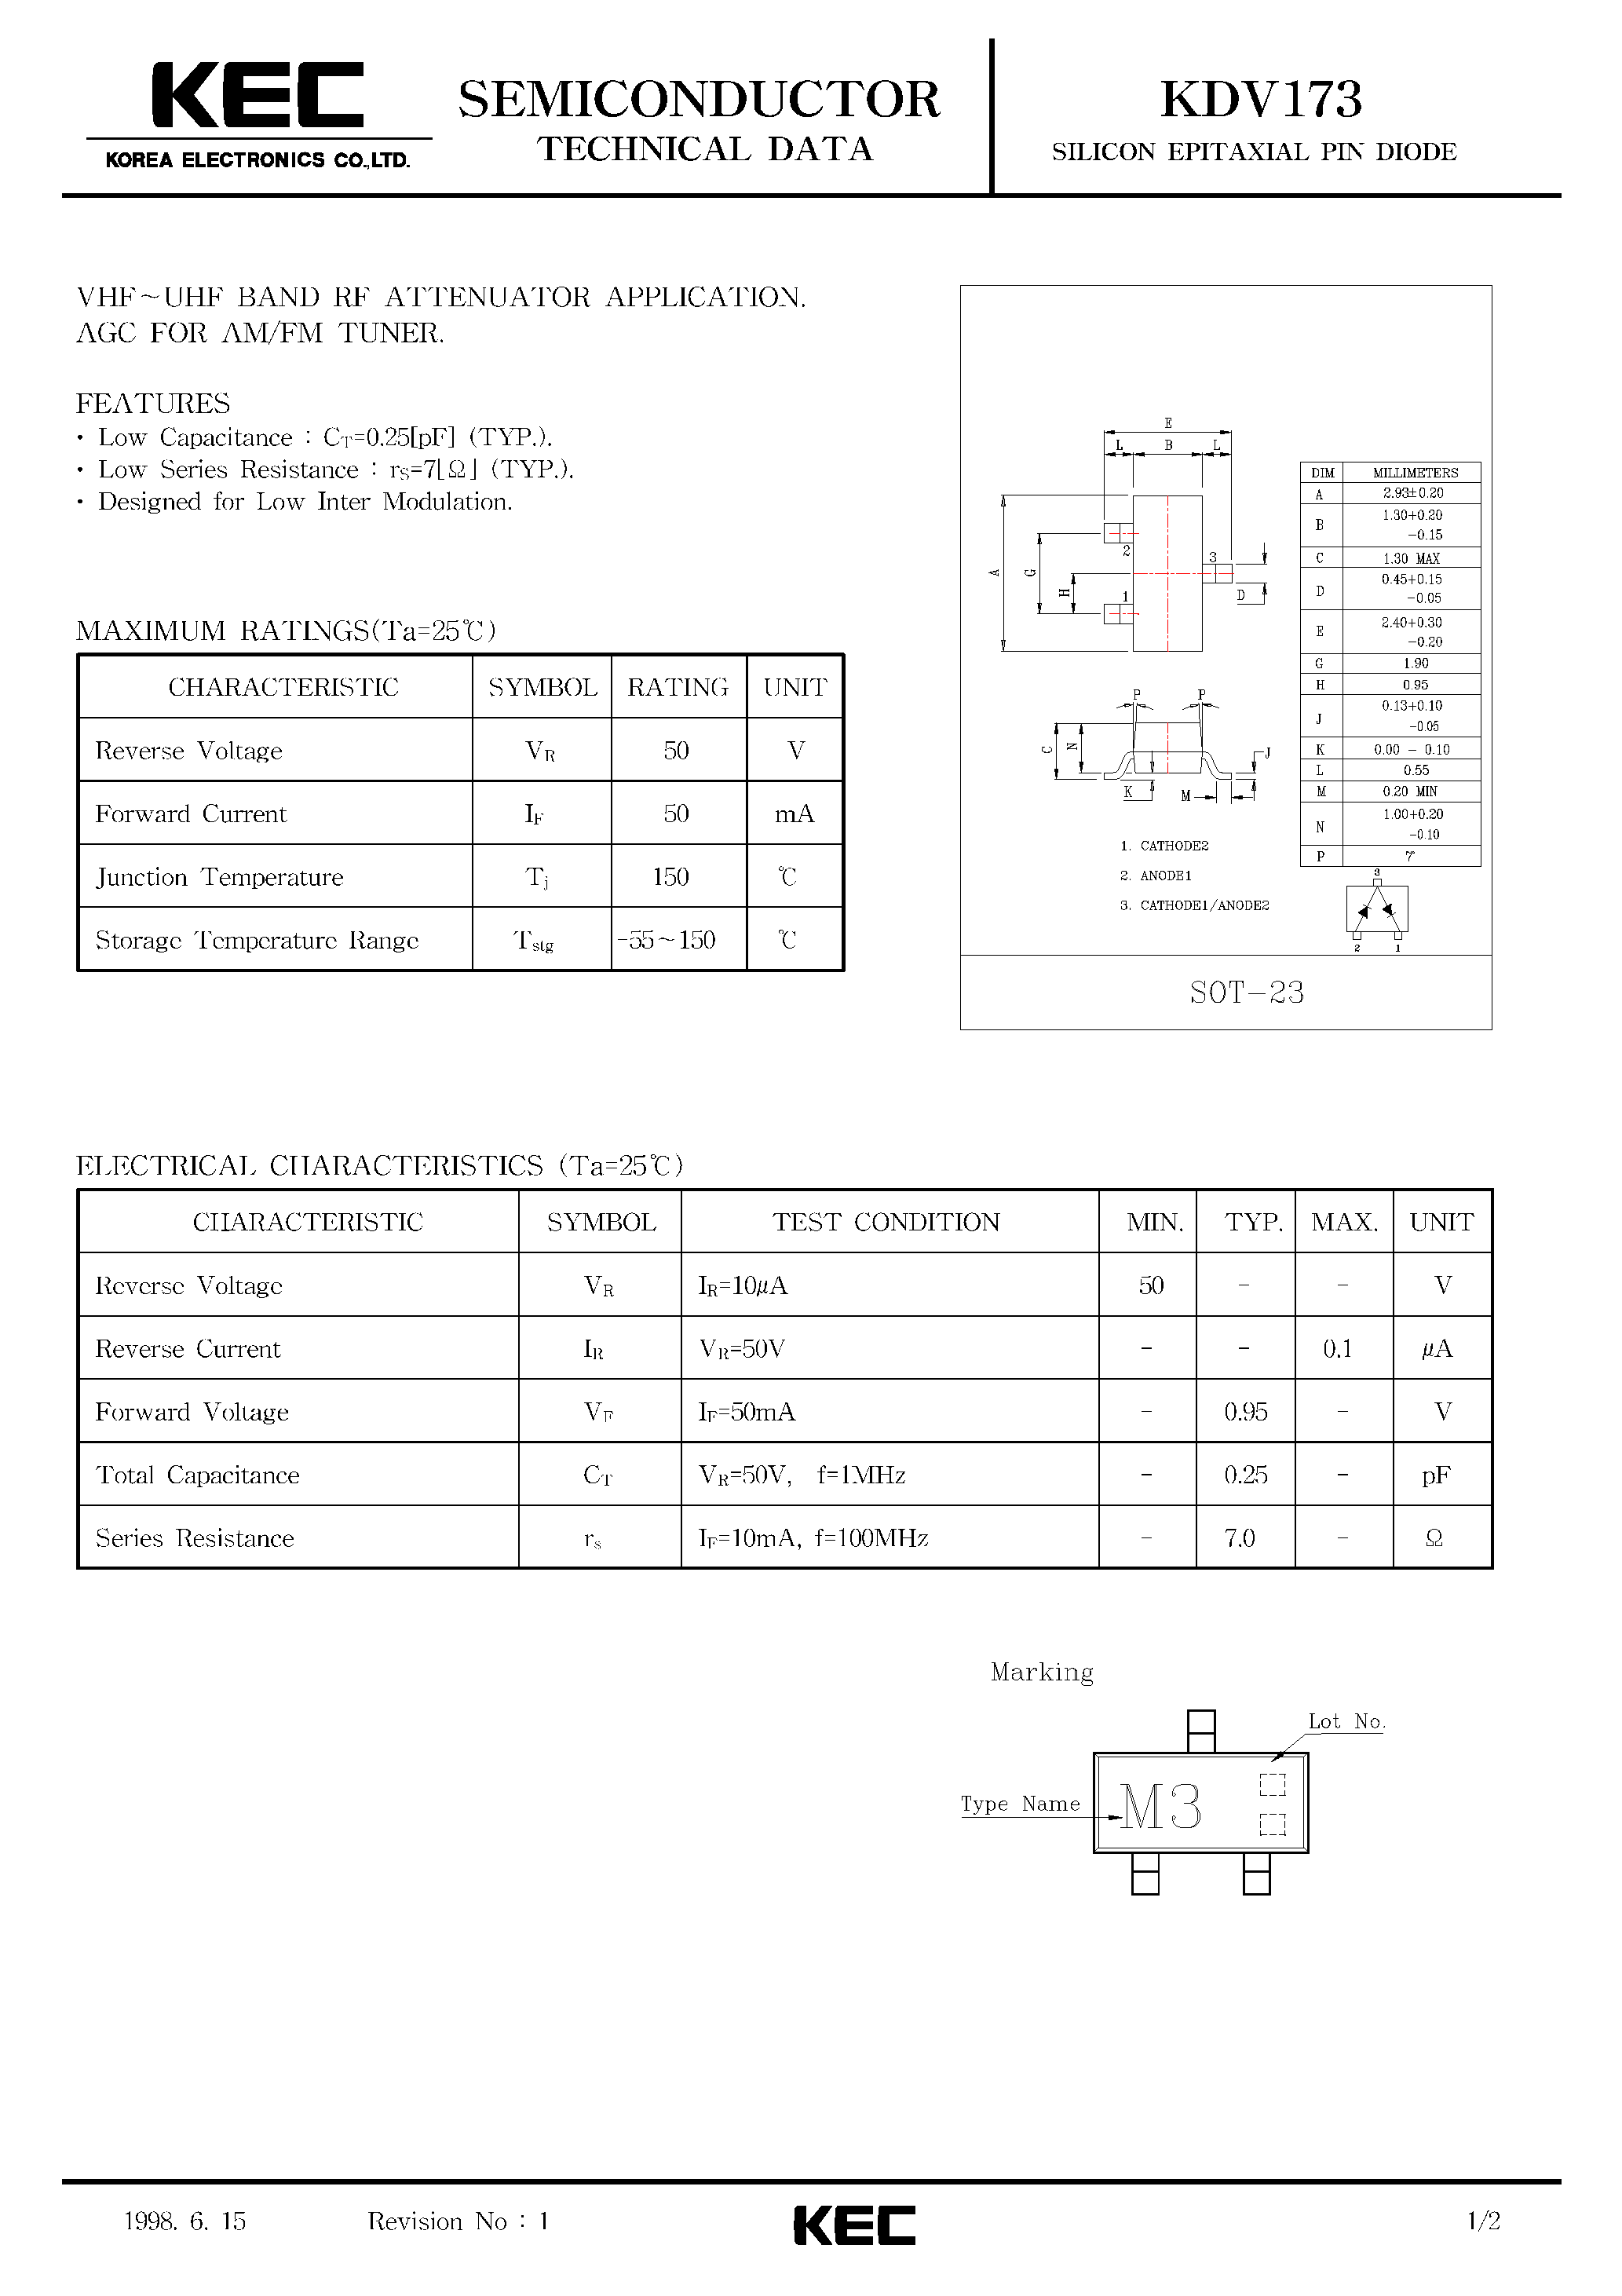 Datasheet KDV173 - SILICON EPITAXIAL PIN DIODE(VHF-UHF BAND RF ATTENUATOR APPLICATION/ AGC FOR AM/FM TUNER) page 1